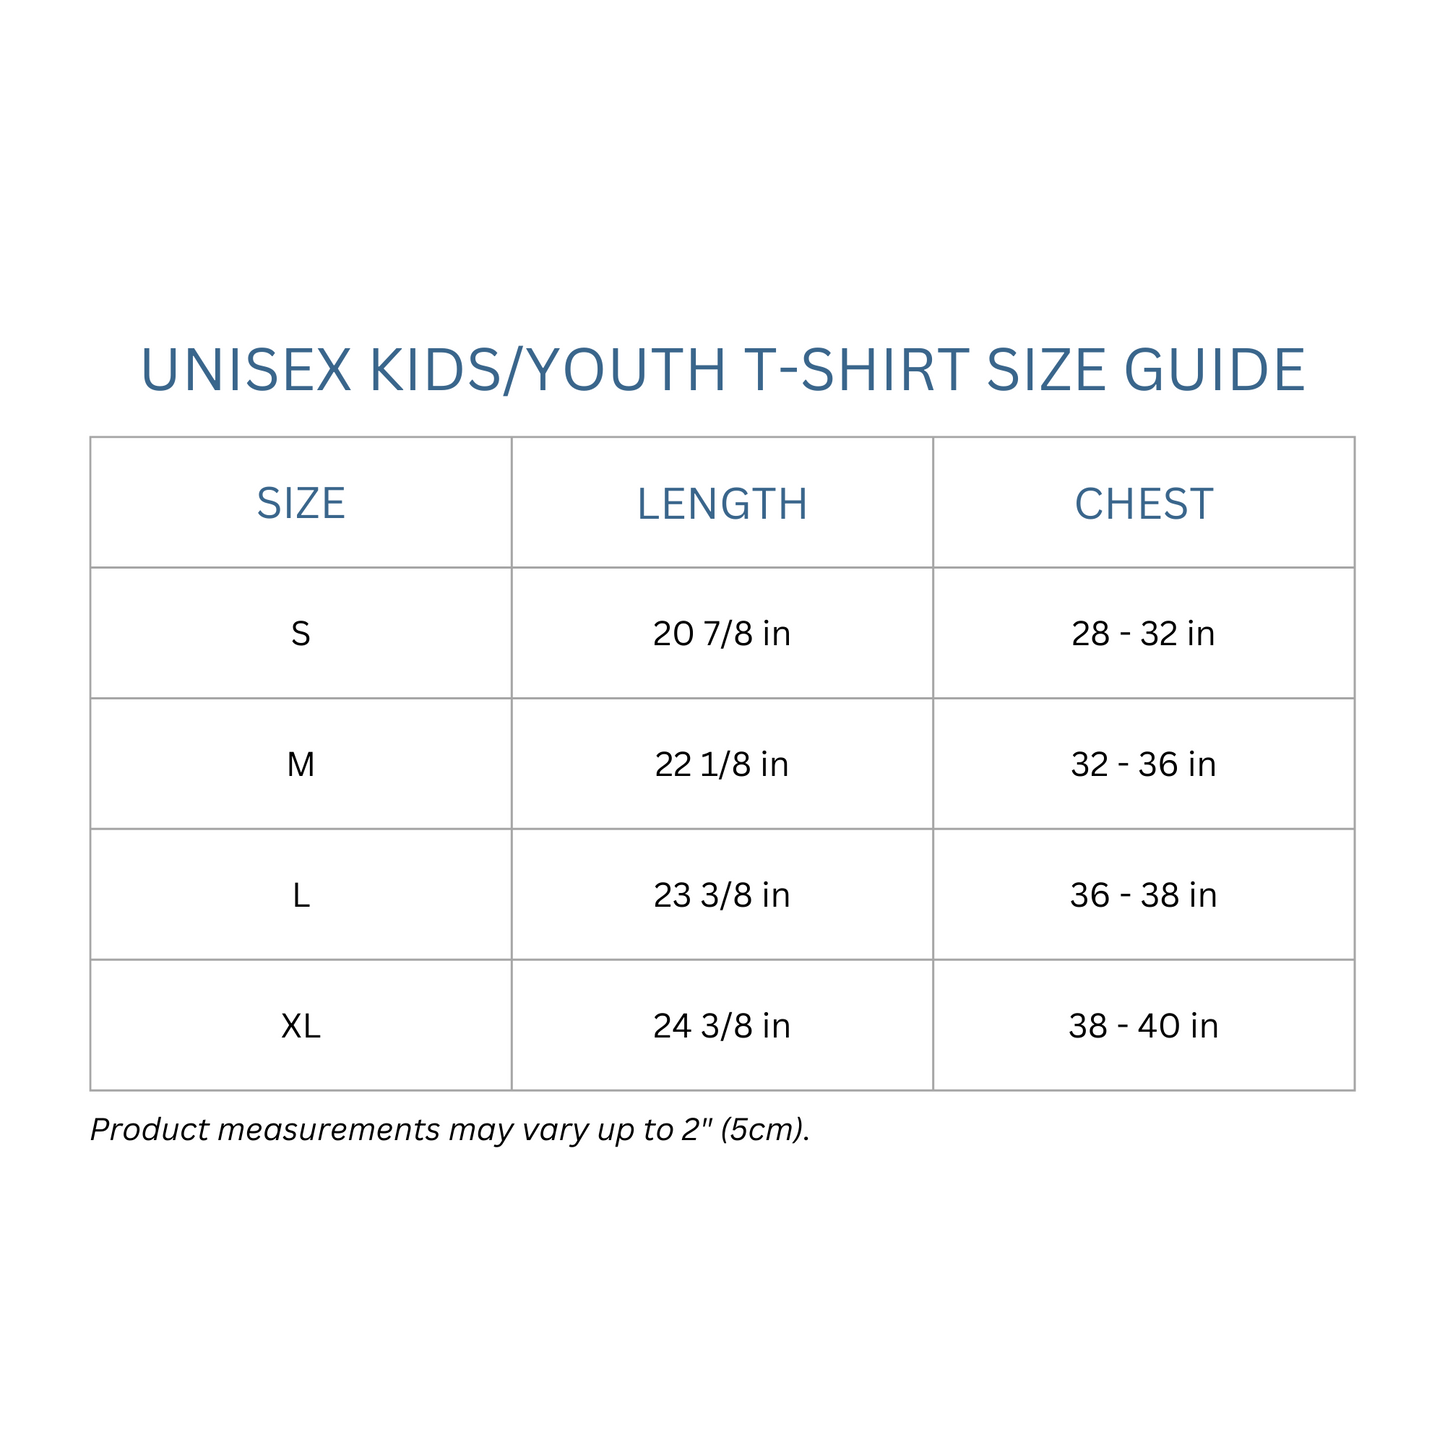 Totes Manila Co size guide for kids/youth unisex shirts